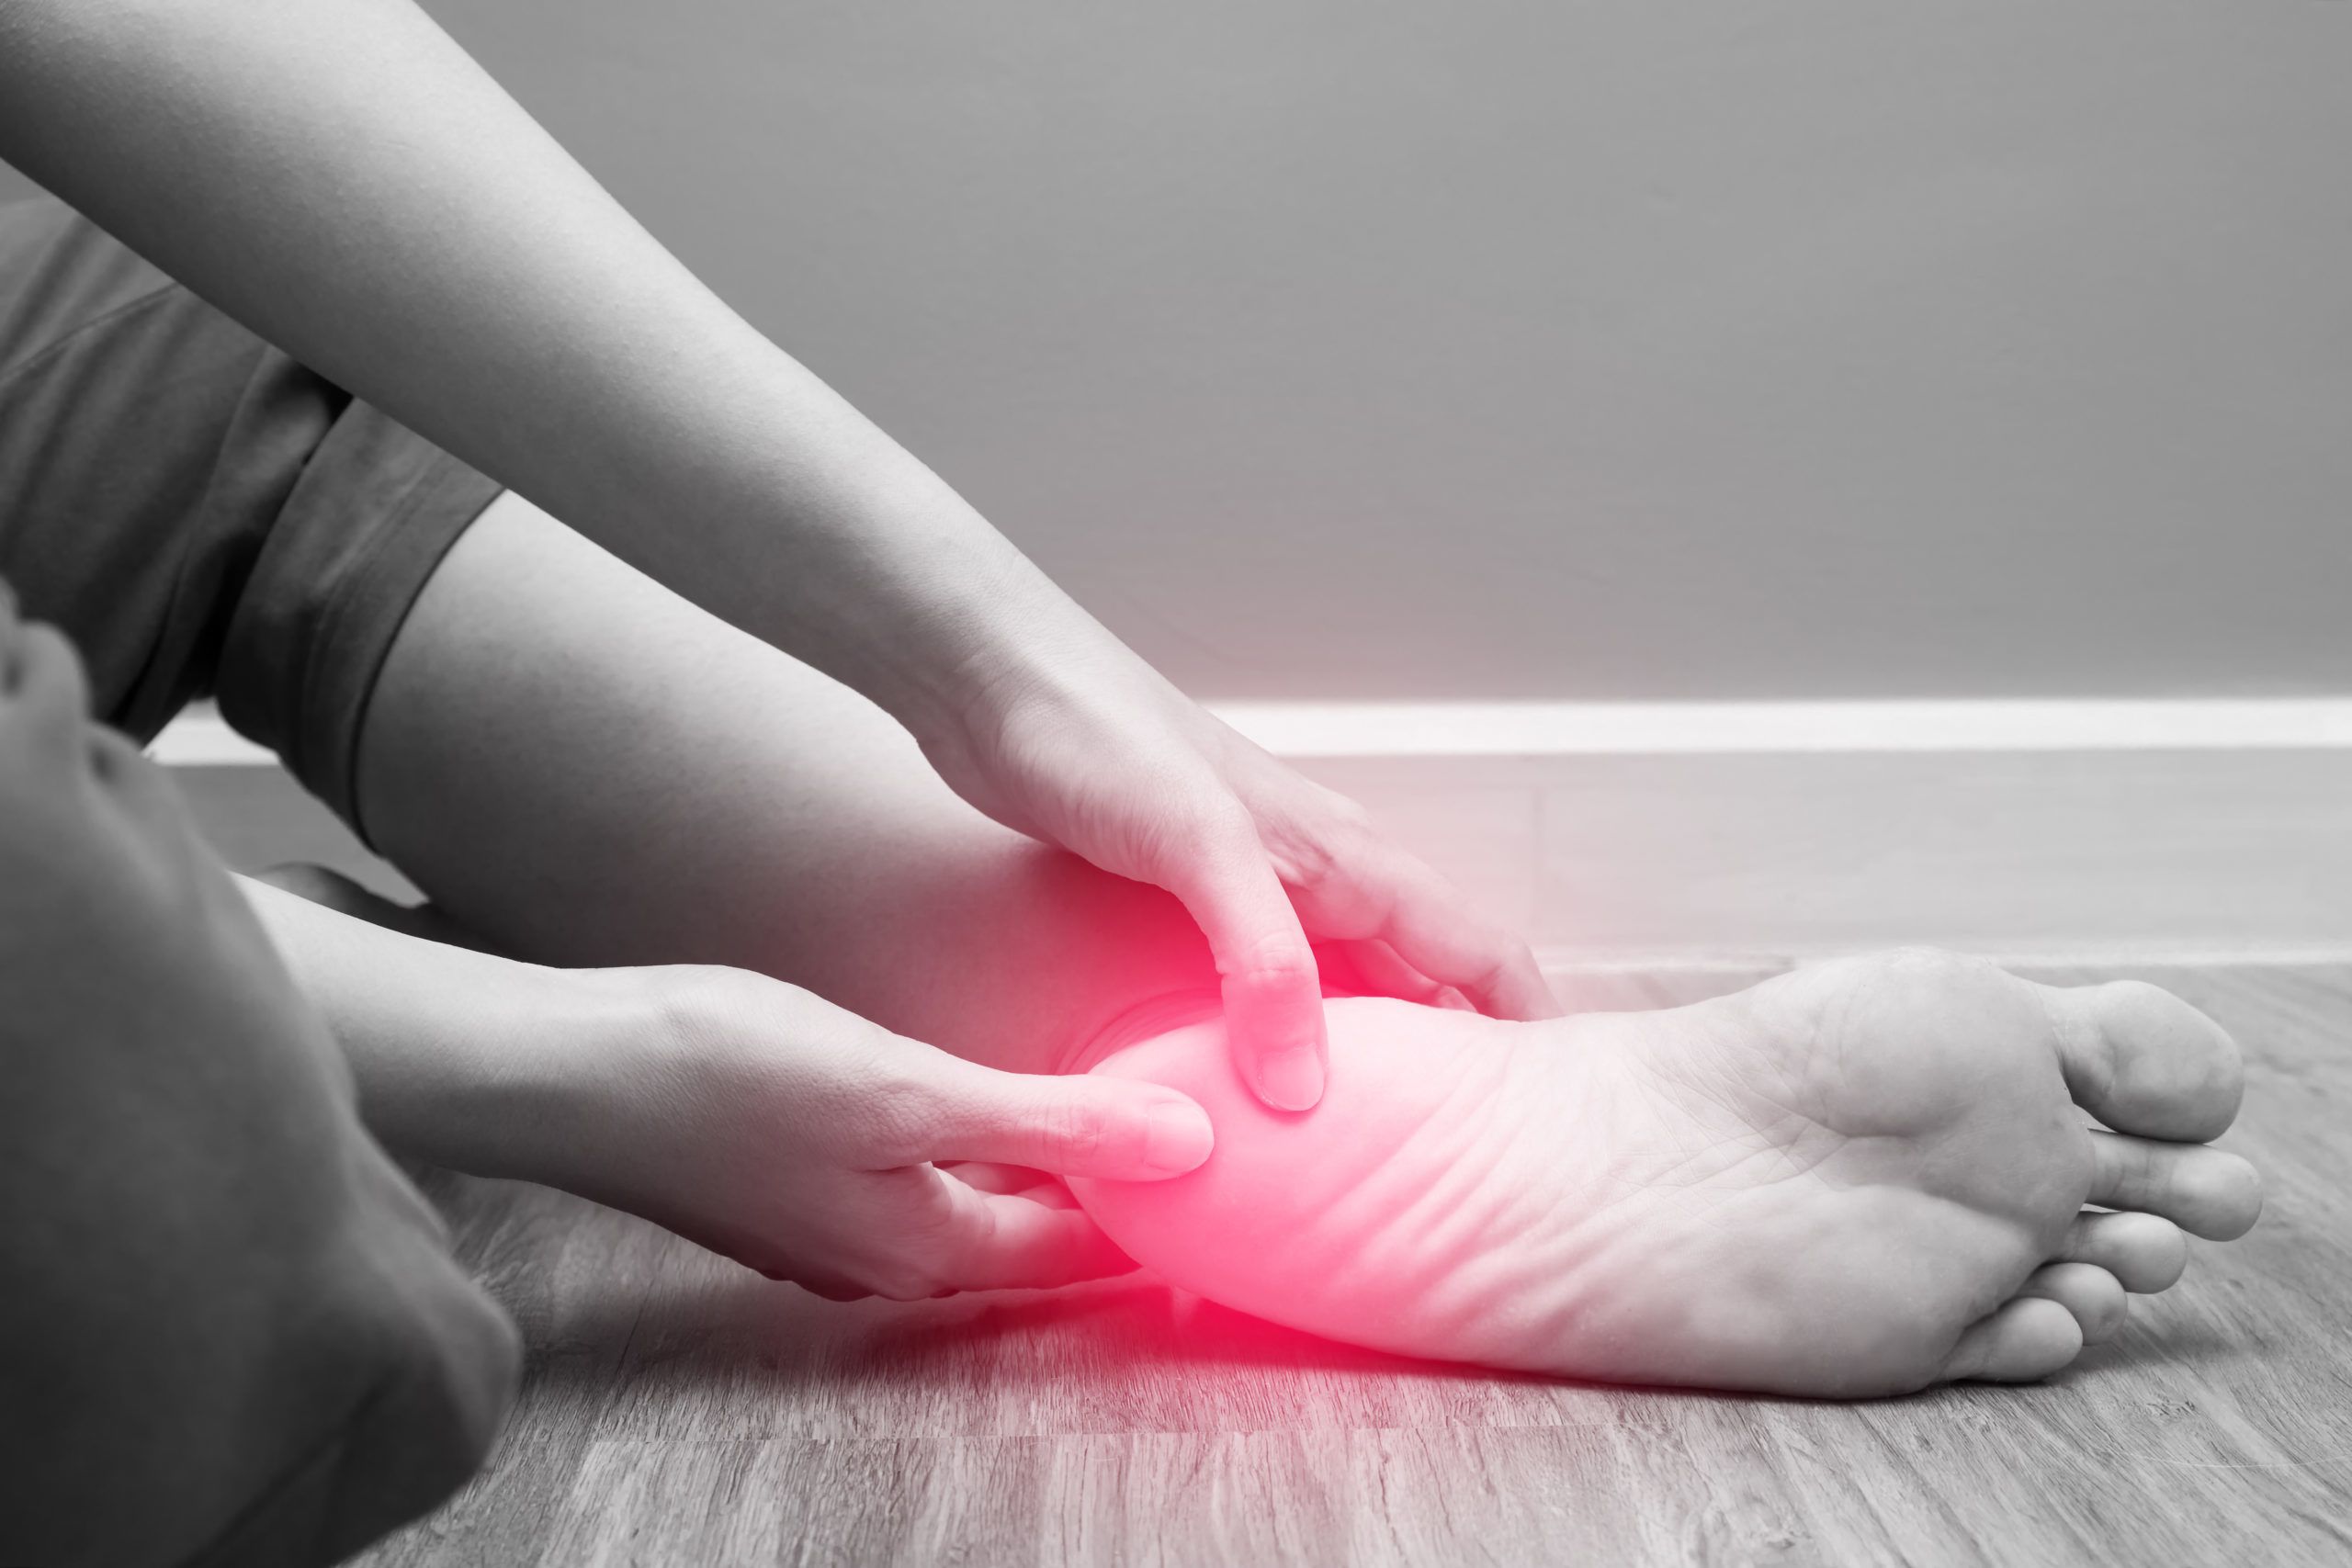 Female foot heel pain with red spot, plantar fasciitis